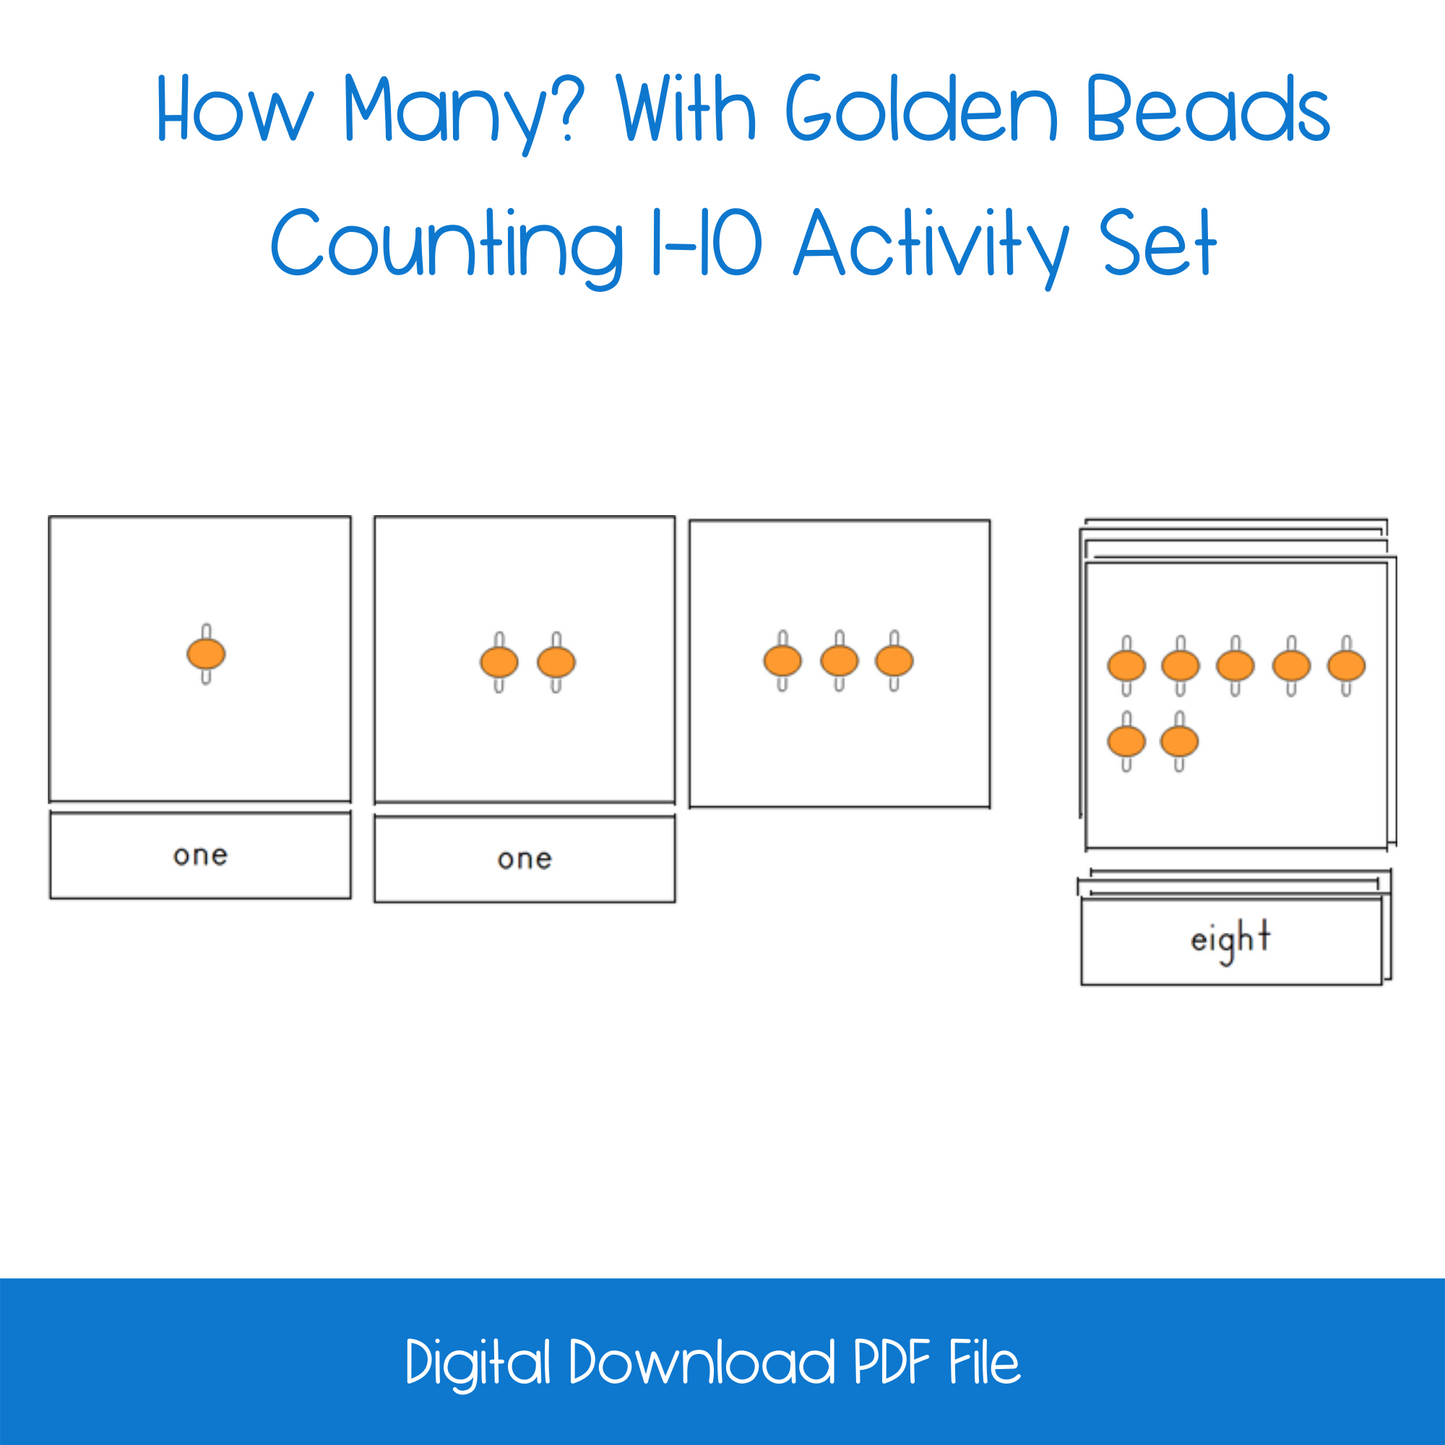 How Many? With Golden Beads Counting 1-10 Activity Set